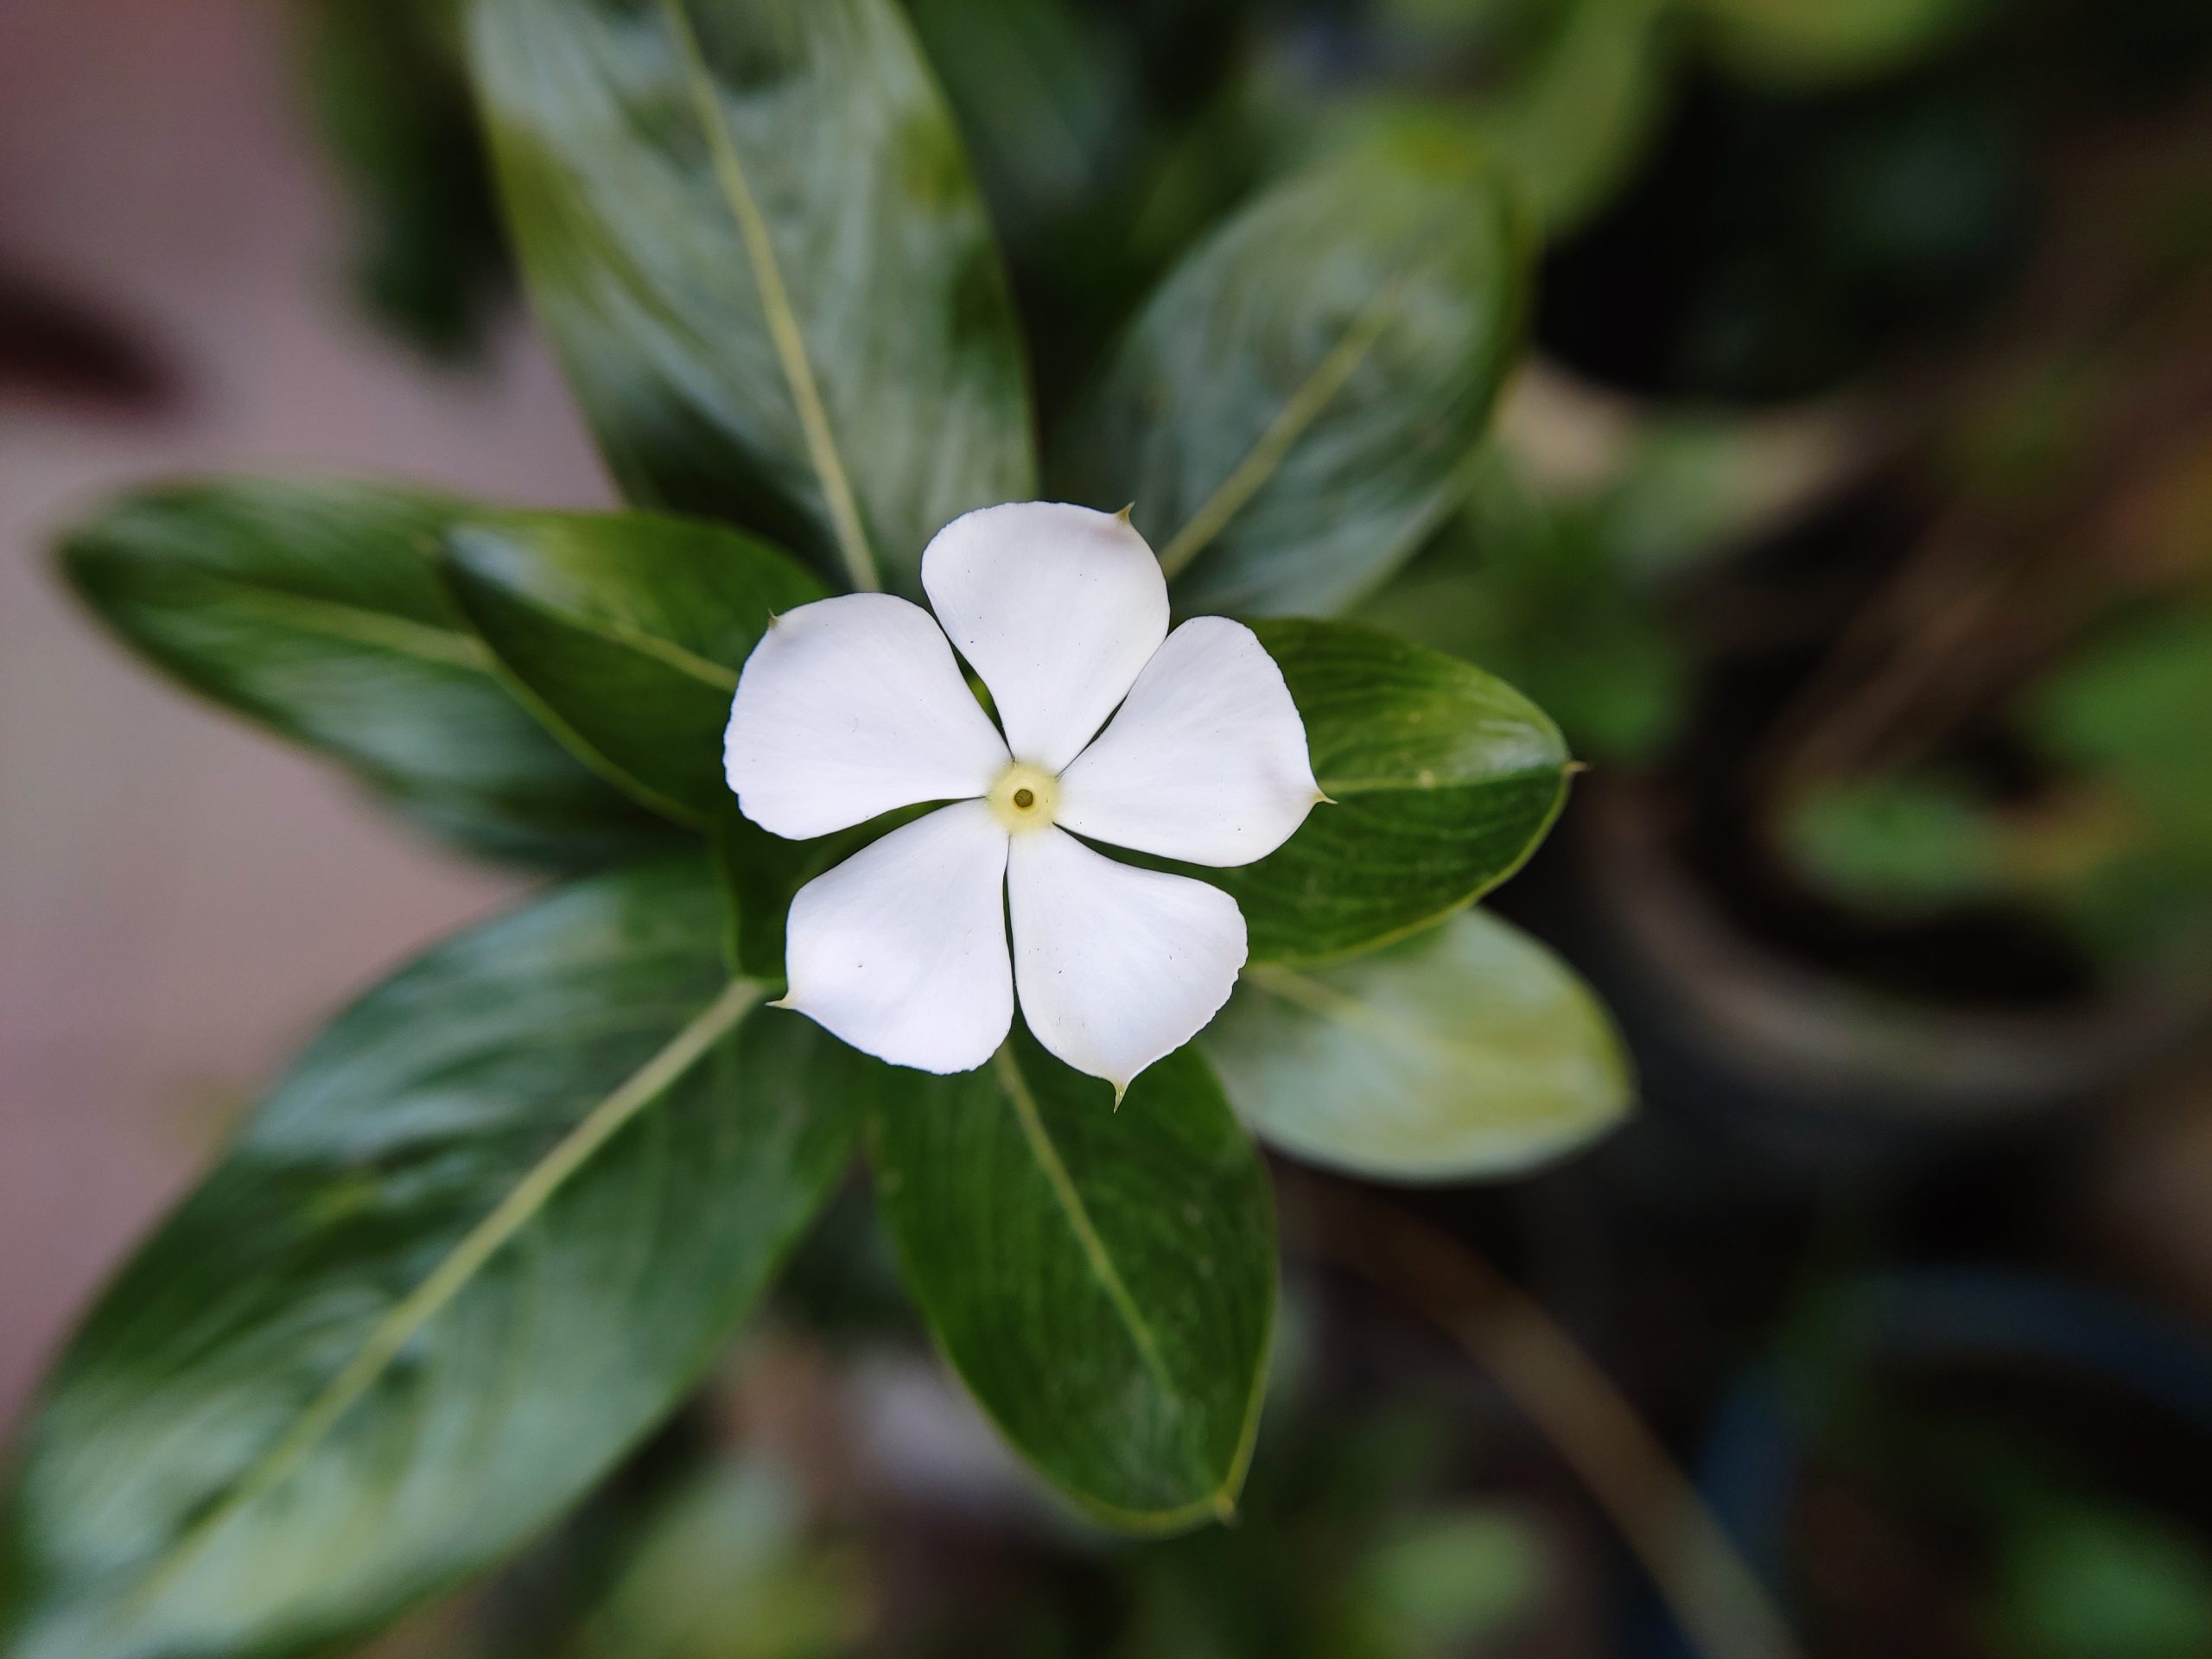 White flower of a plant